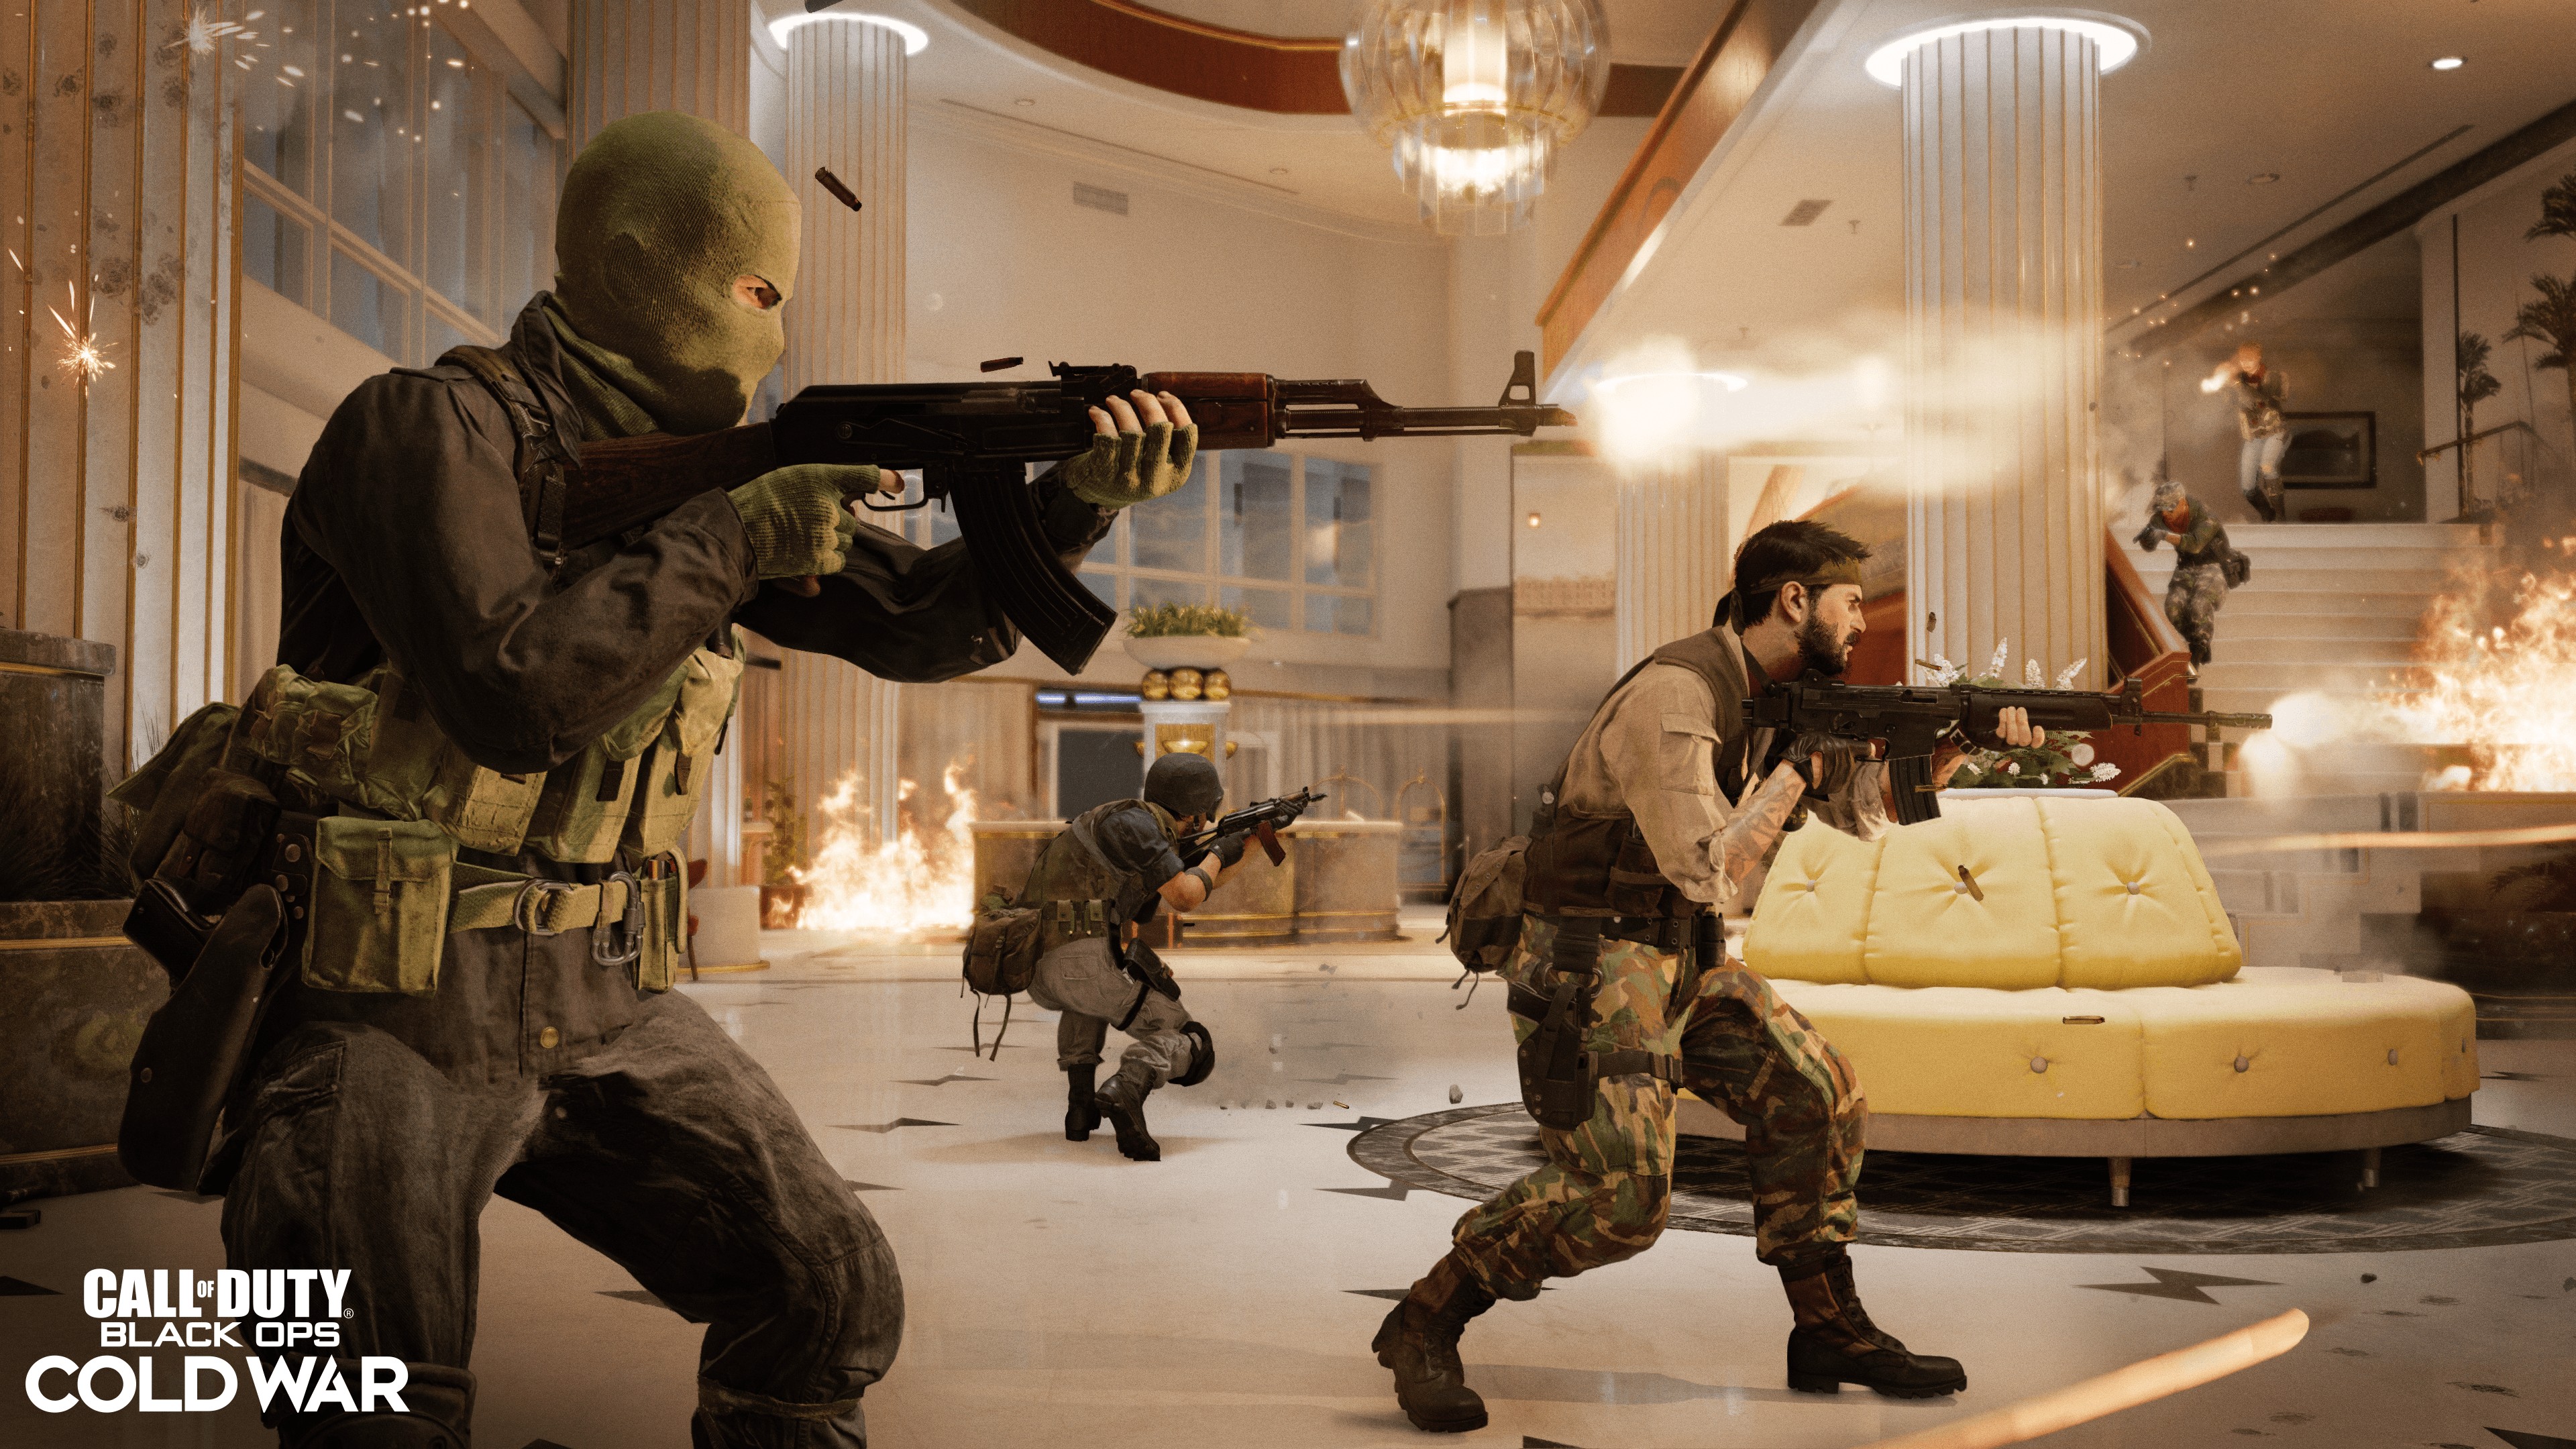 Call of Duty: Advanced Warfare Available for PS3, PS4 Cross-buy